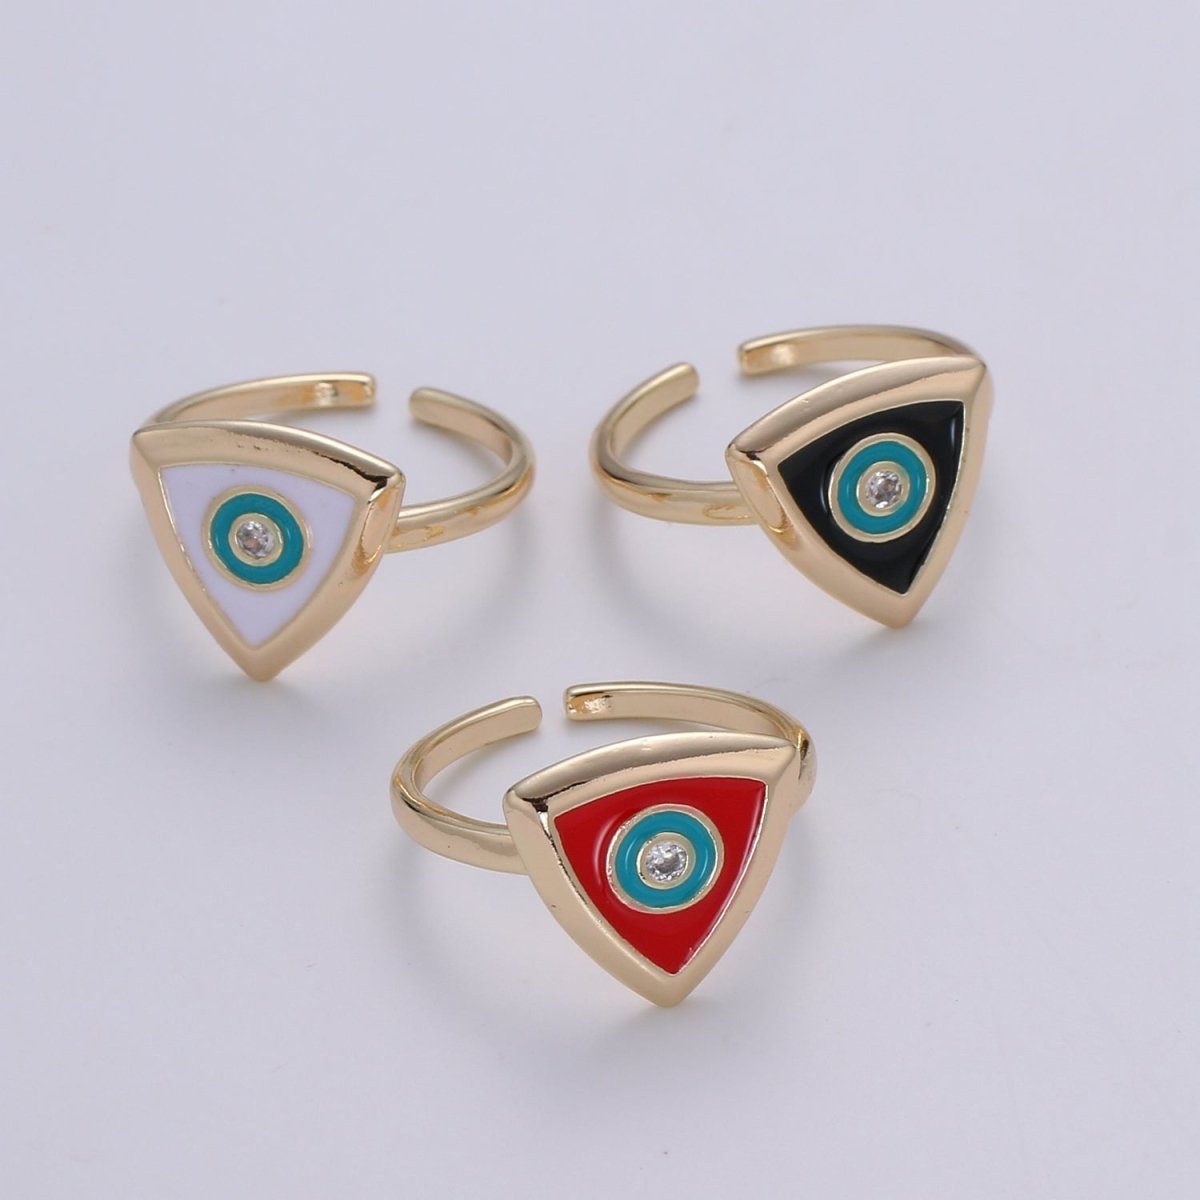 1x Evil Eye Ring ,Gold Open Adjustable Ring Minimalist Jewelry Enamel Triangle Ring Everyday Wear White Black Red O-334 ~ O-336 - DLUXCA